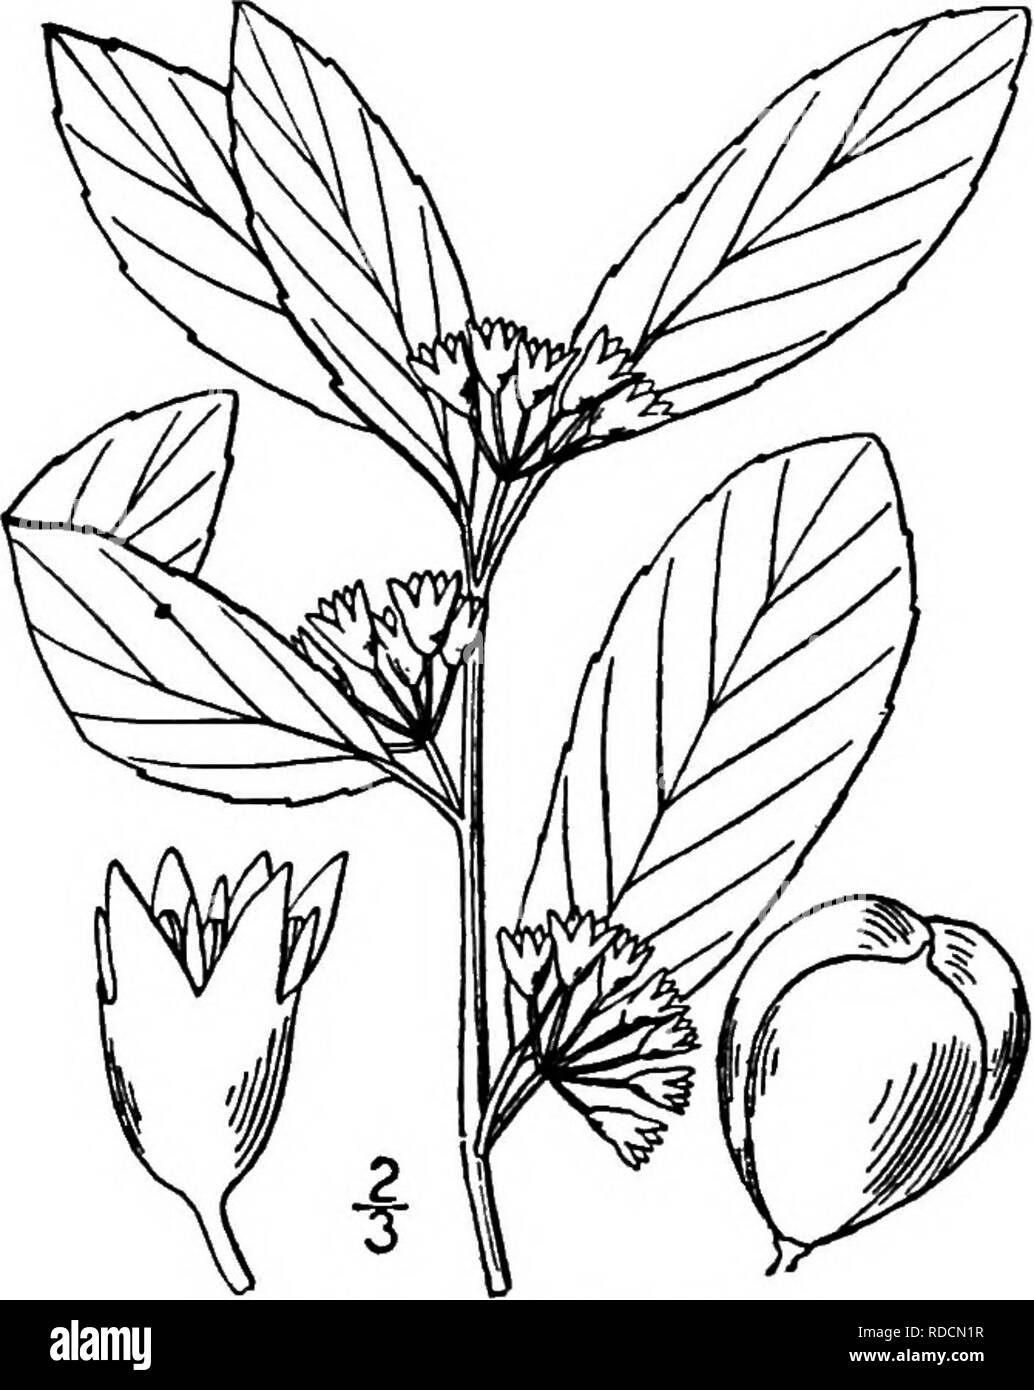 . North American trees : being descriptions and illustrations of the trees growing independently of cultivation in North America, north of Mexico and the West Indies . Trees. 676 The Buckthorns Rhamnus Frangula), one occurs in the West Indies, and several in Mexico and Central America. It was to R. caihartica Linnaeus, the type species, to which the Greek name, now the name of the genus, was originally appUed. The Buckthorns have bitter bark, alternate simple usually toothed leaves, with small stipules, which fall away early, and small green clustered axillary flowers, either perfect or imperf Stock Photo